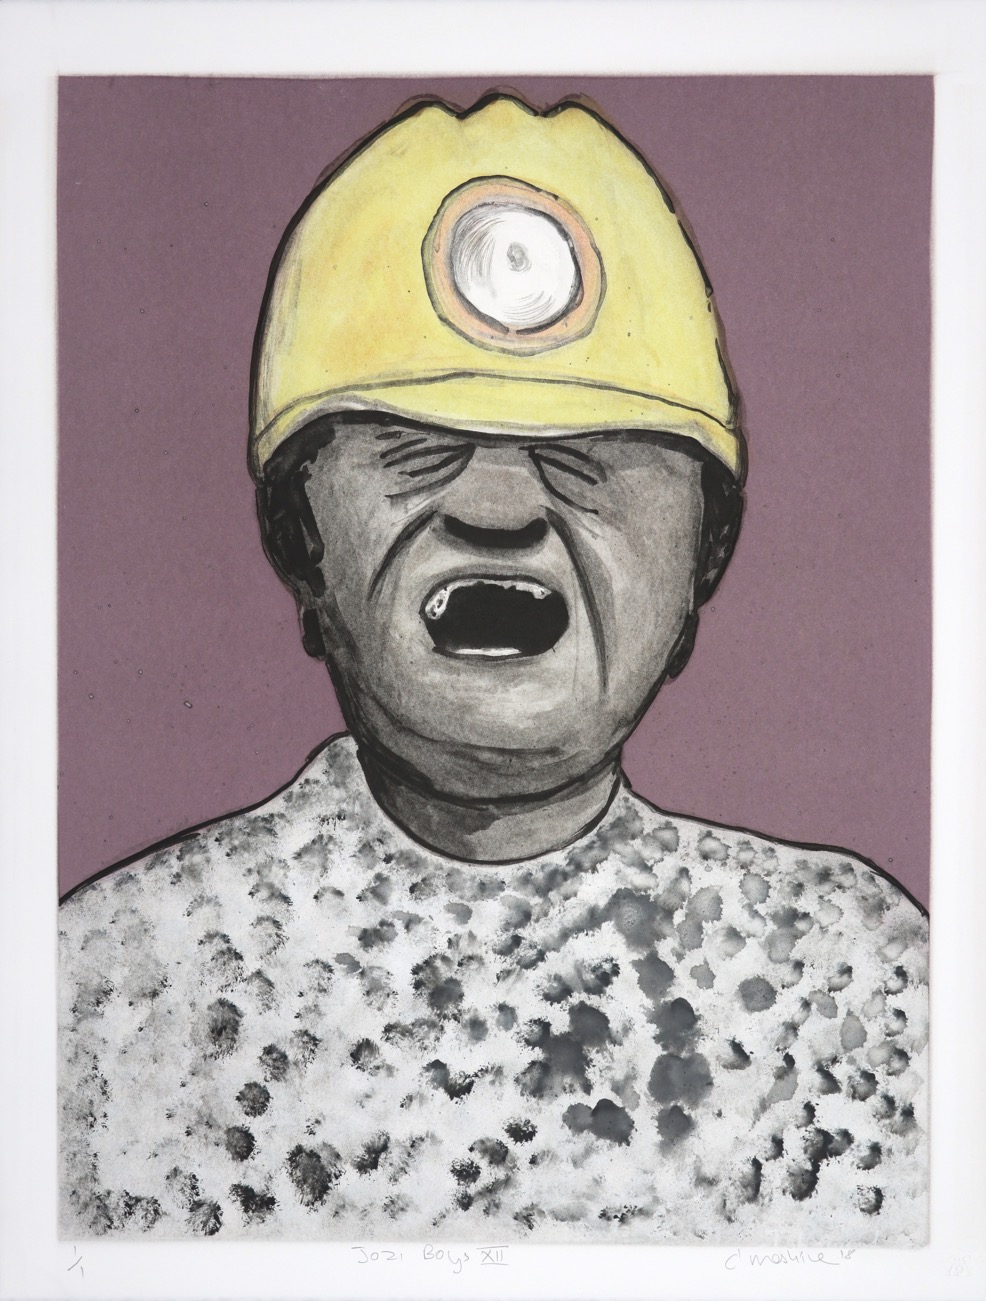 Head and shoulders portrait of a shouting man wearing a mining helmet.